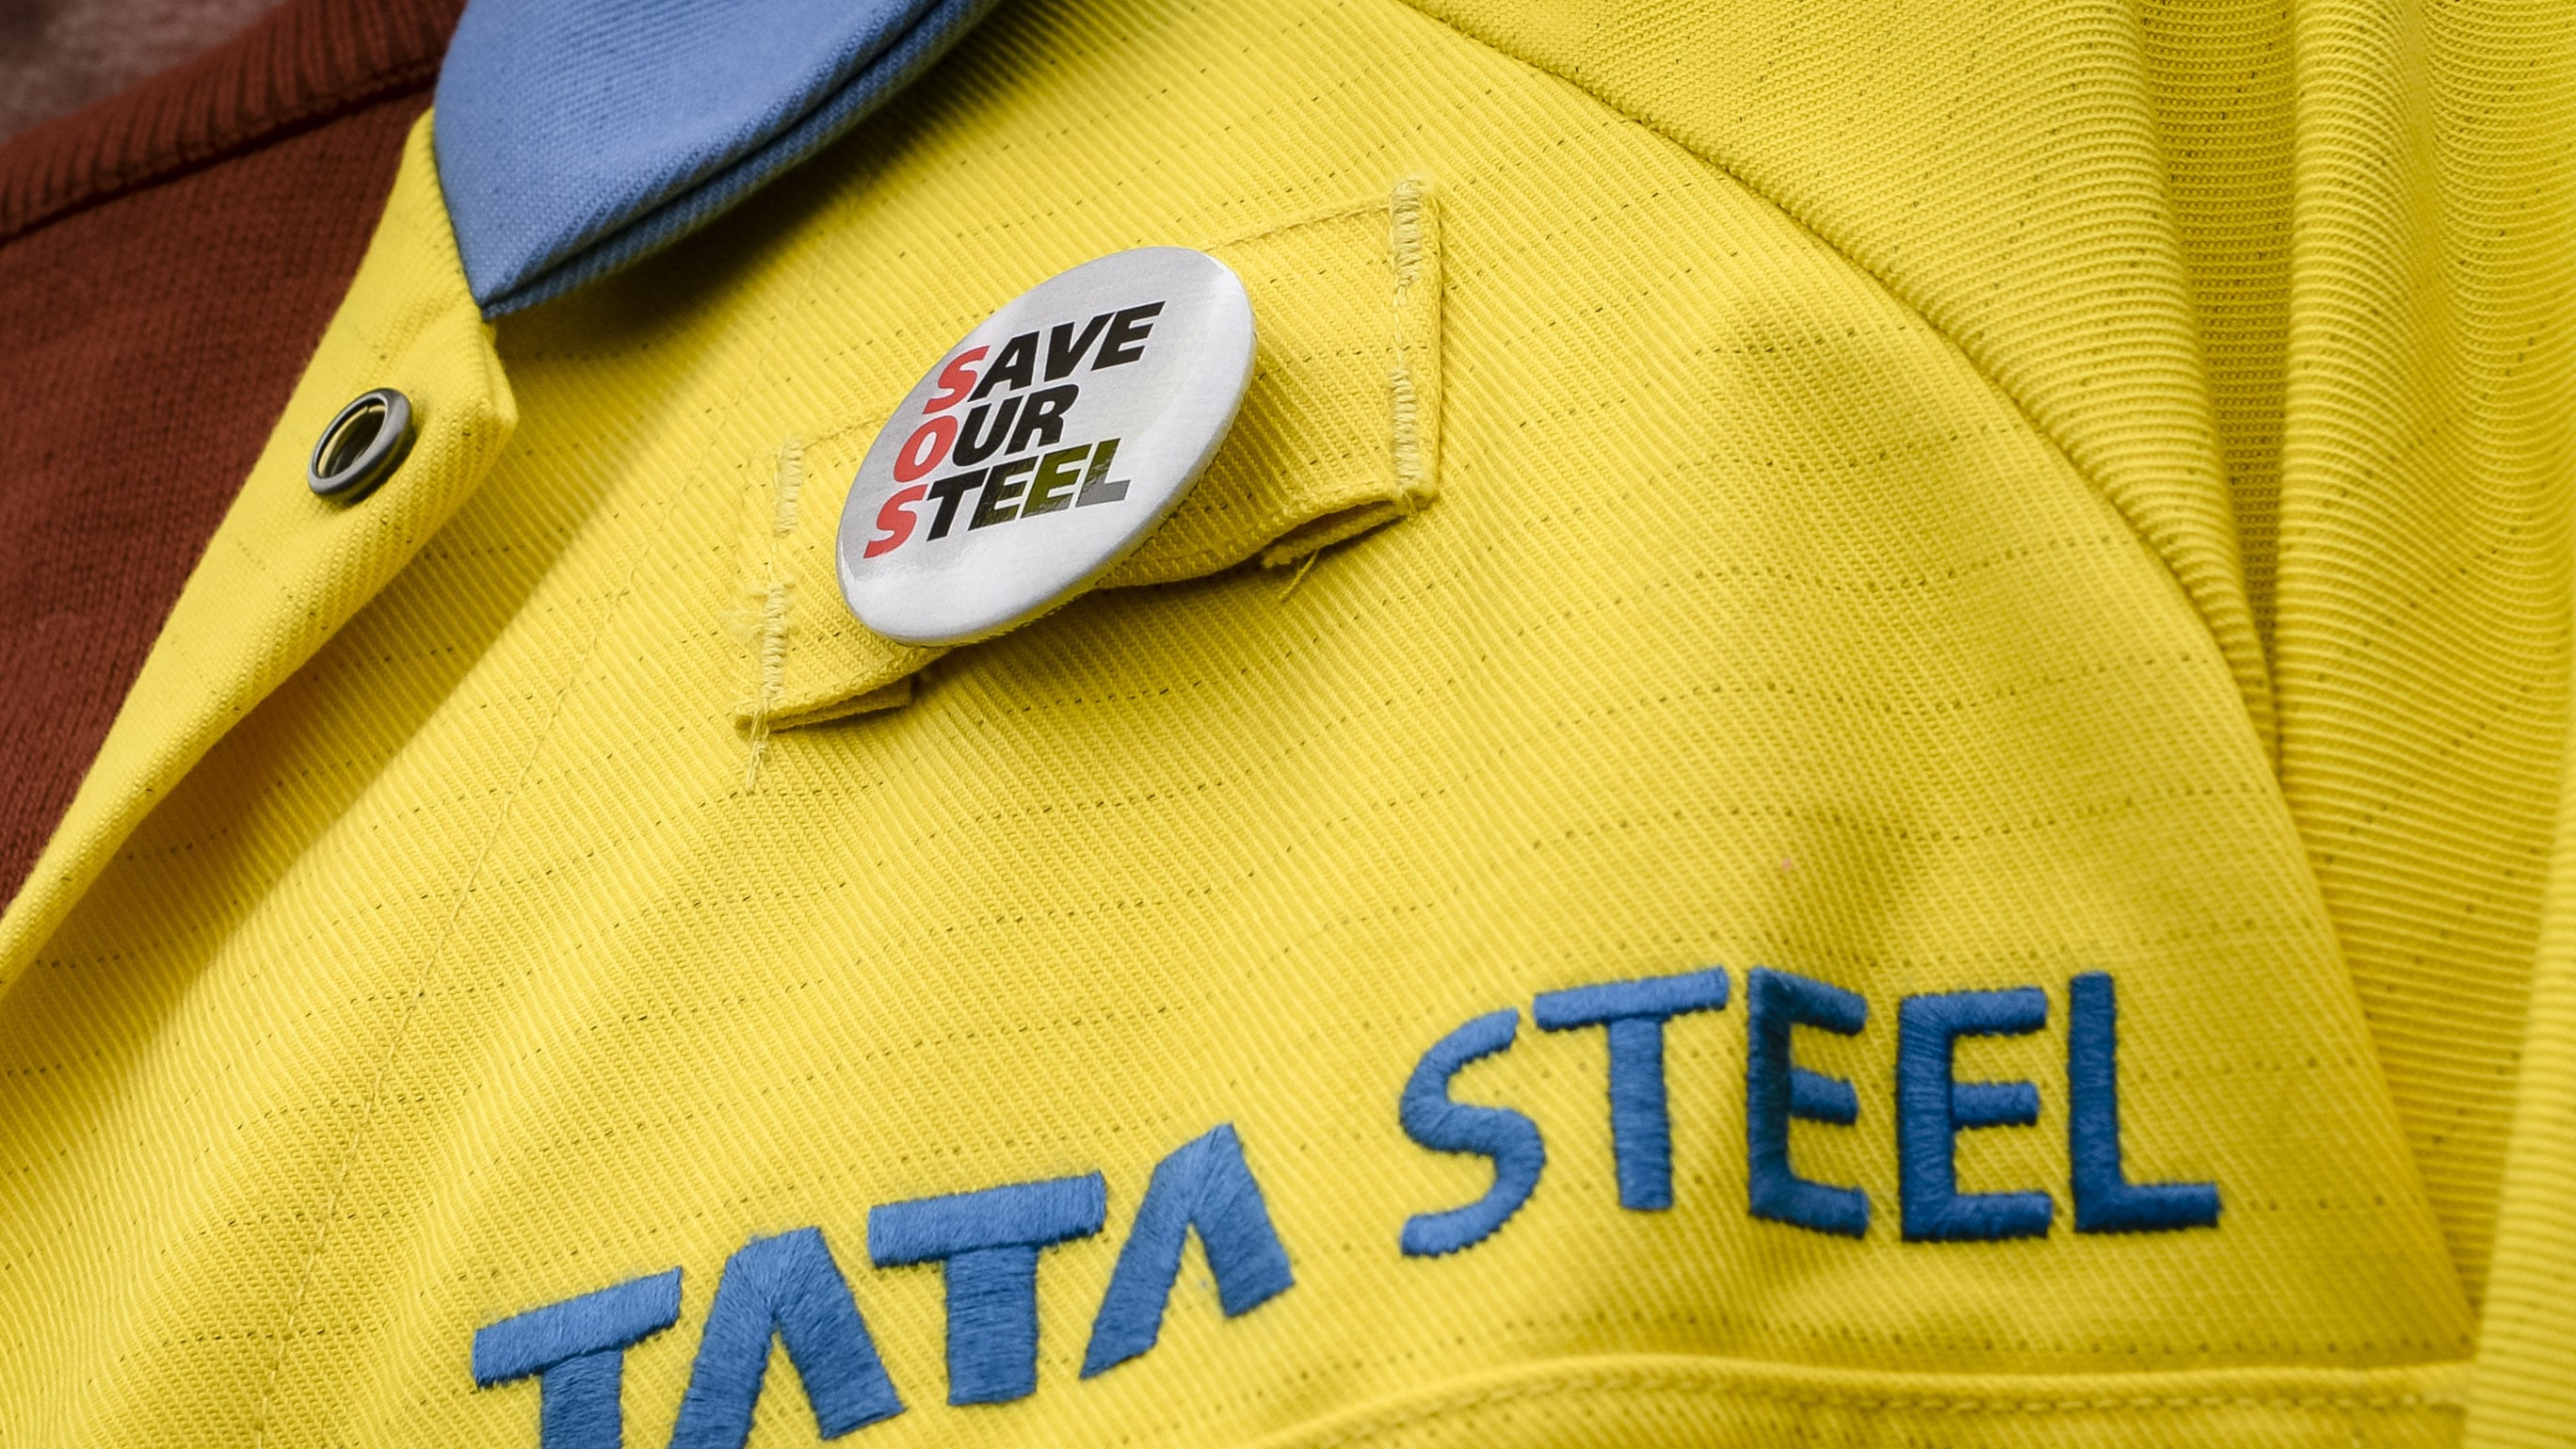 Tata Steel is to close its blast furnaces at Port Talbot, South Wales